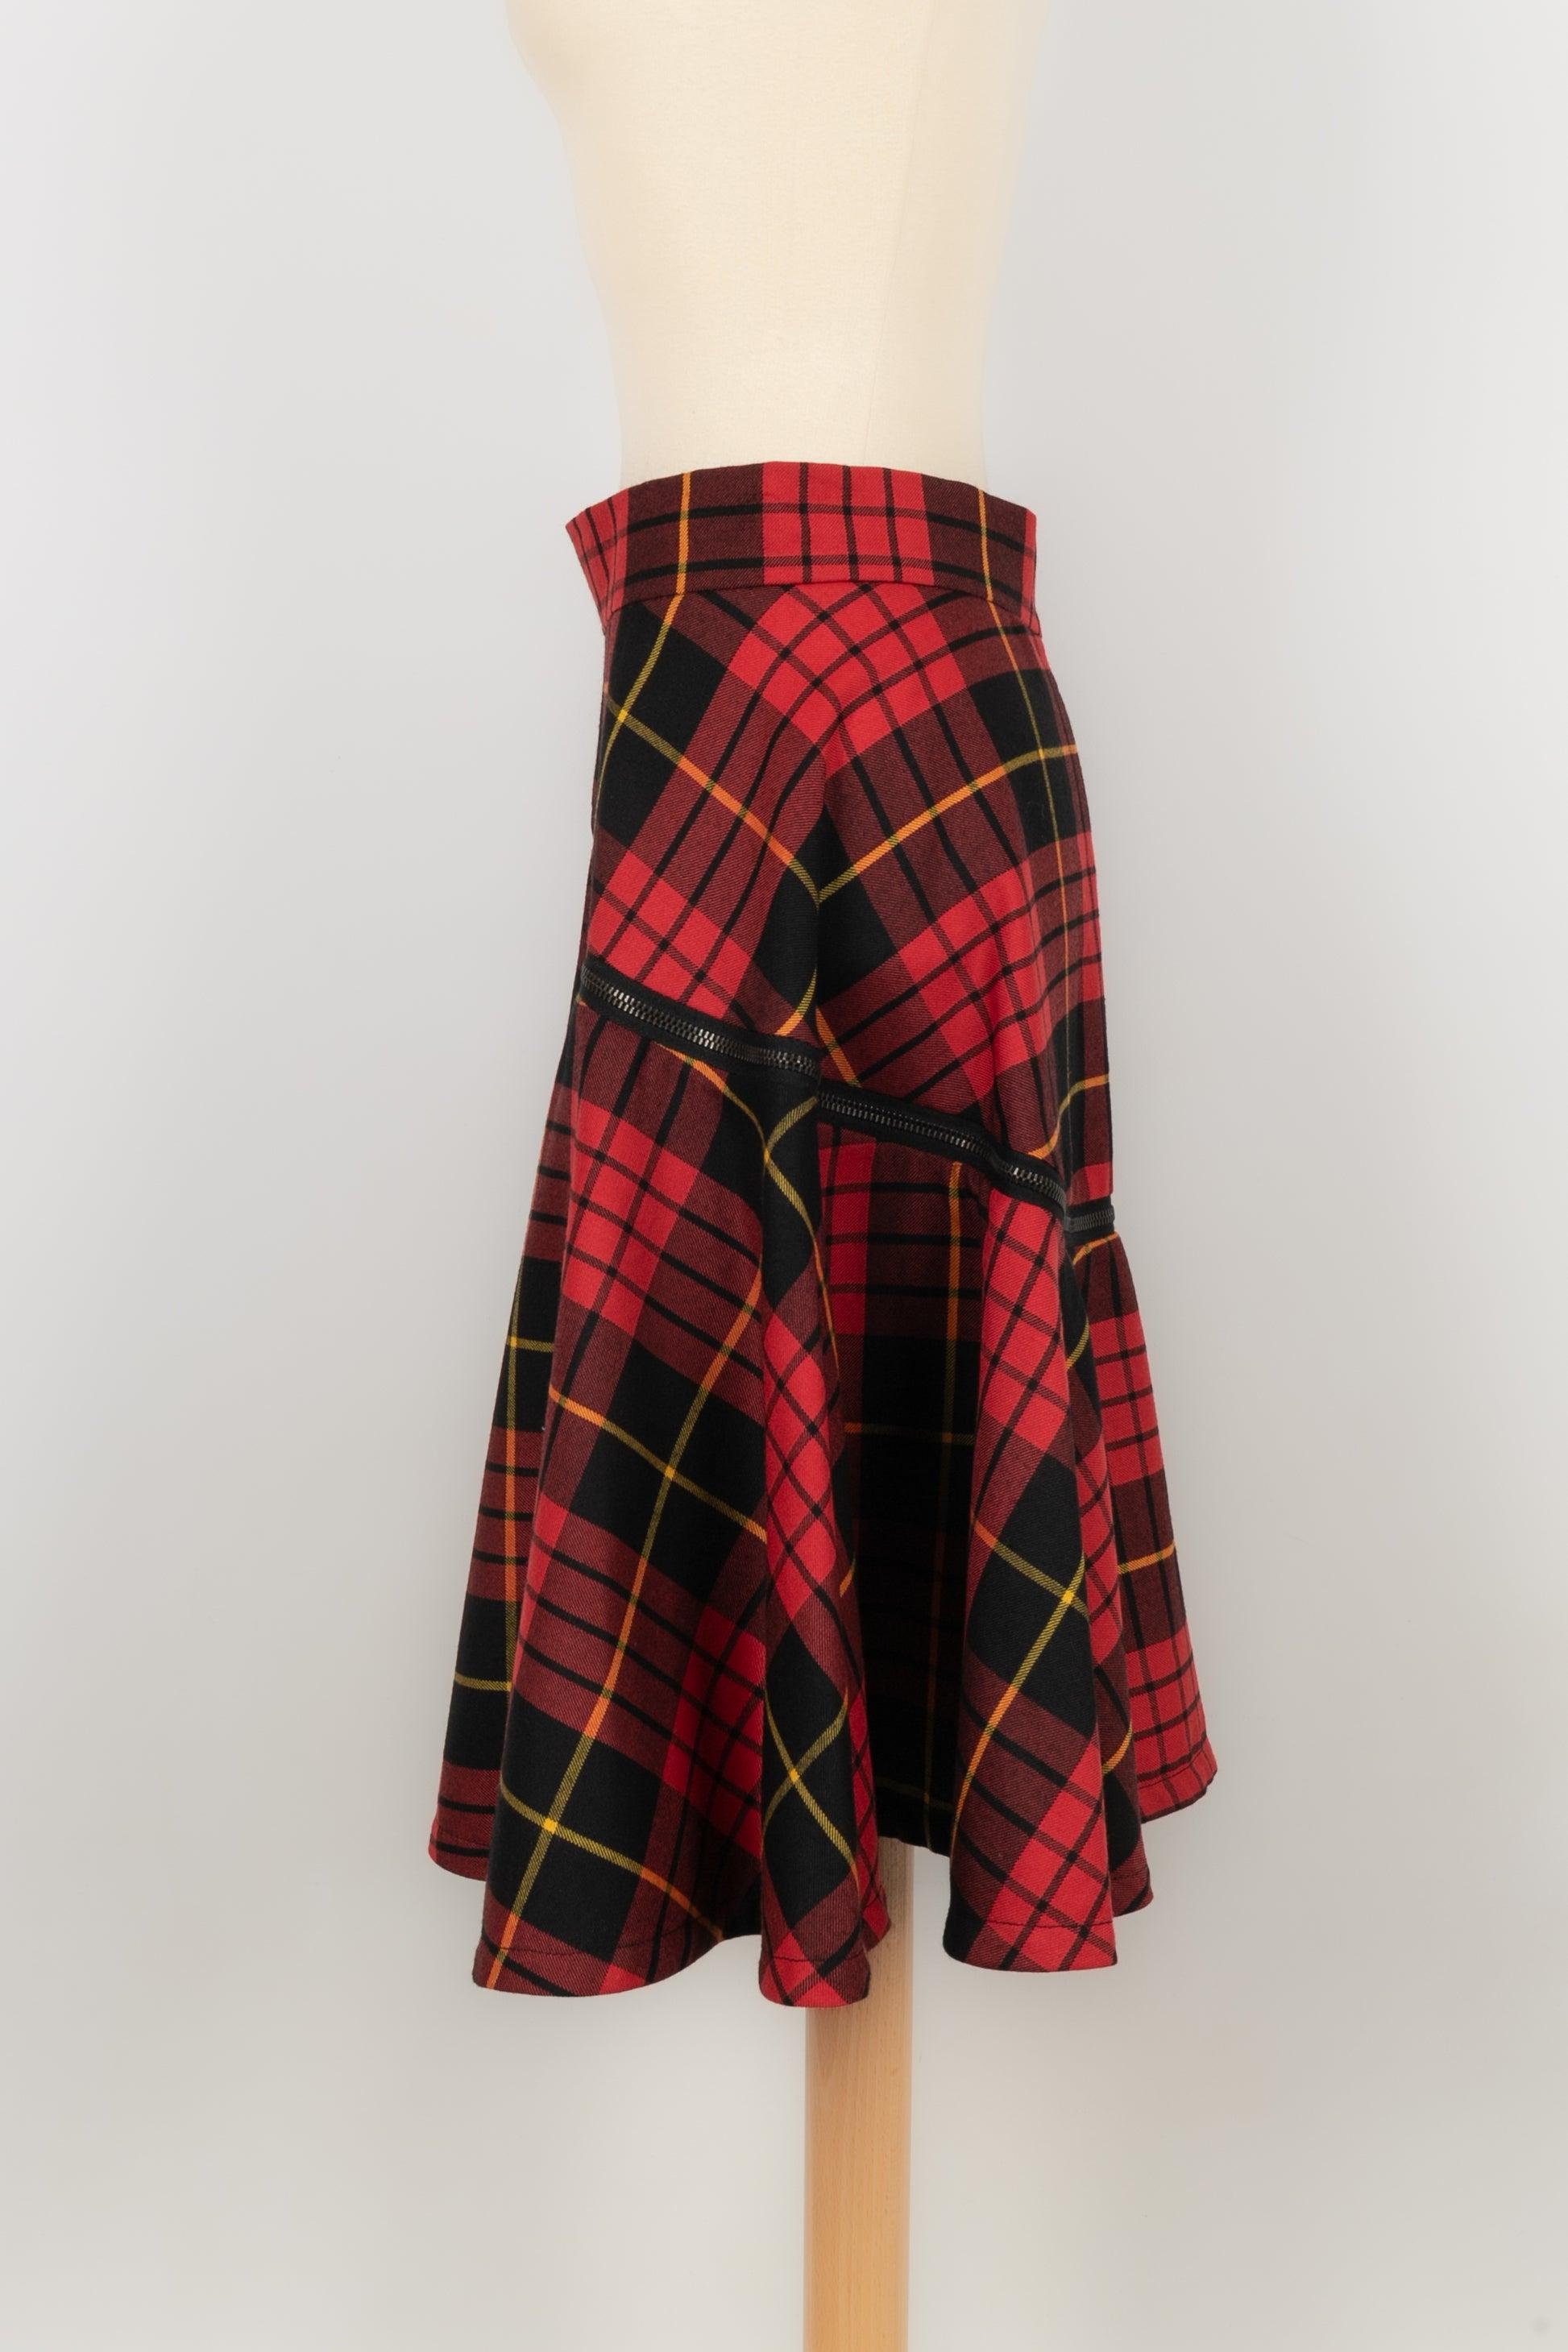 Alexander Mc Queen - Red and black tone tartan skirt ornamented with a zip. Indicated size 40 IT, it fits a 38 FR.

Additional information:
Condition: Very good condition
Dimensions: Shoulder width: Waist: 35 cm
Length: 60 cm

Seller reference: FJ54